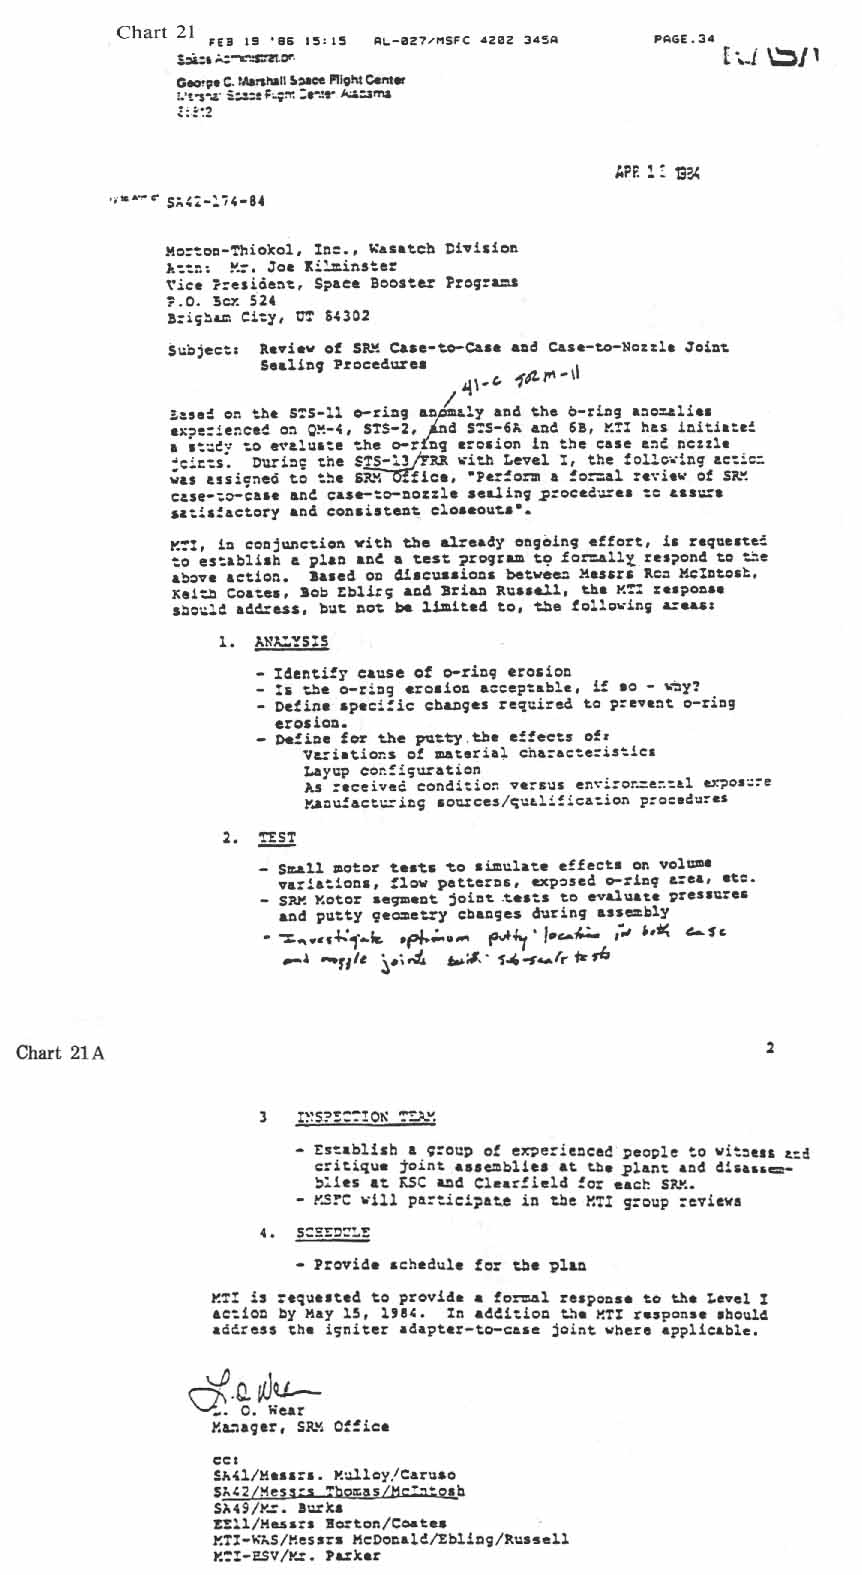 charts 21-21A [Chart 21: Letter from L.O. Wear to Joe Kilminster. Date: April 1984. Subject: Review of SRM Case-to-Case and Case-to-Nozzle Joint Sealing Procedures; Chart 21A: Letter from L.O. Wear to Joe Kilminster. Date: April 1984. Subject: Review of SRM Case-to-Case and Case-to-Nozzle Joint Sealing Procedures-continued]